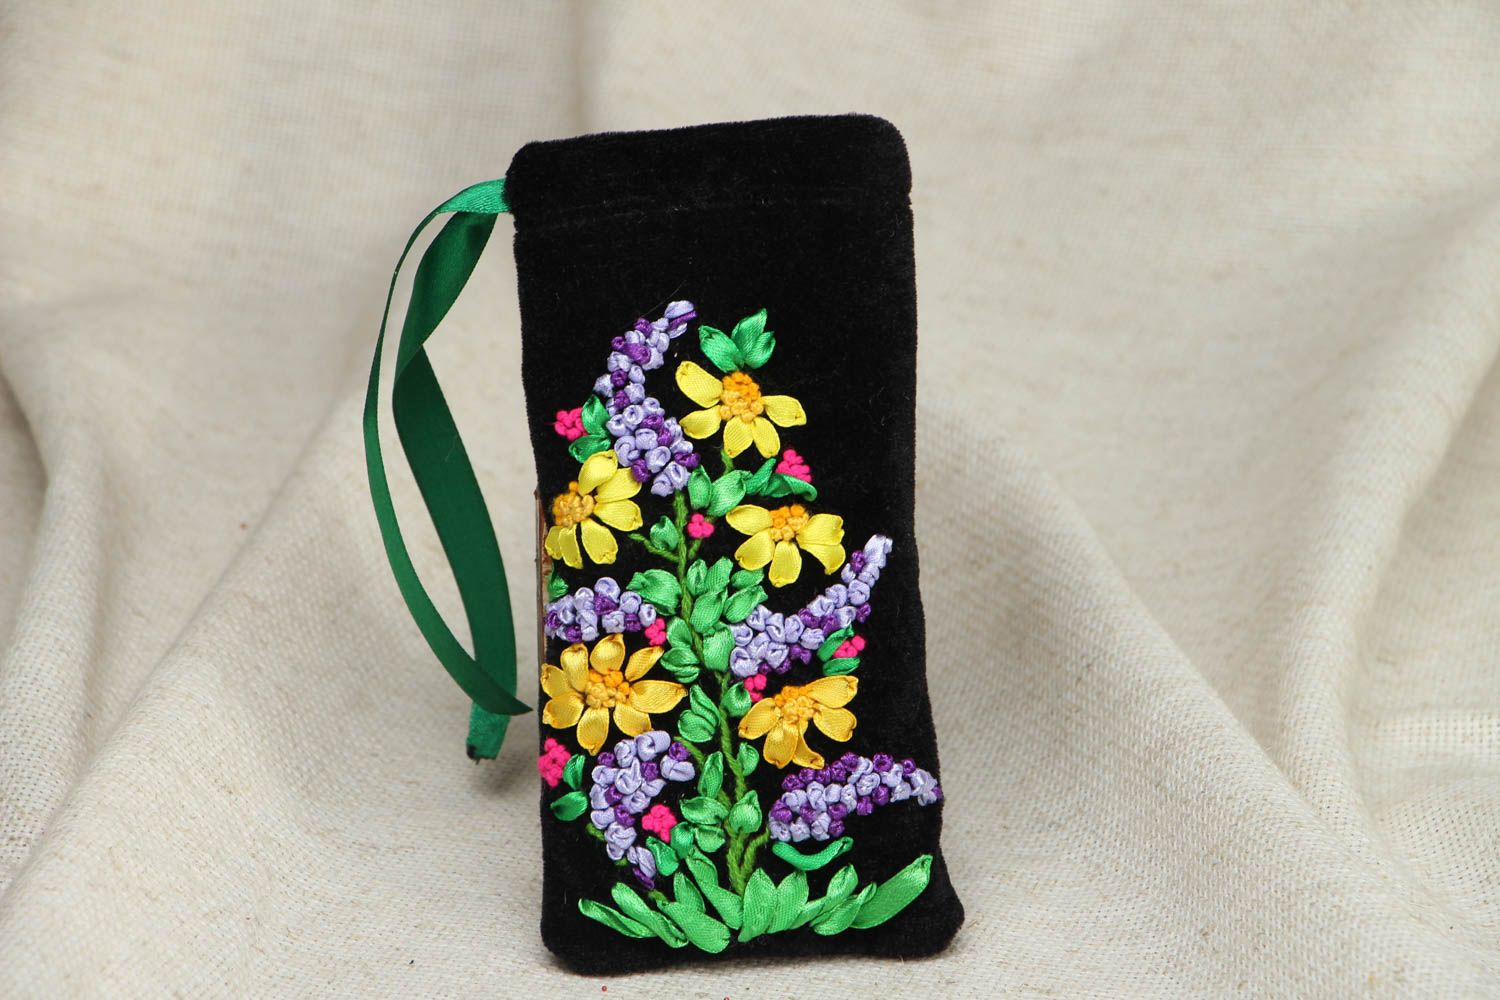 Velor sunglasses case embroidered with ribbons photo 1